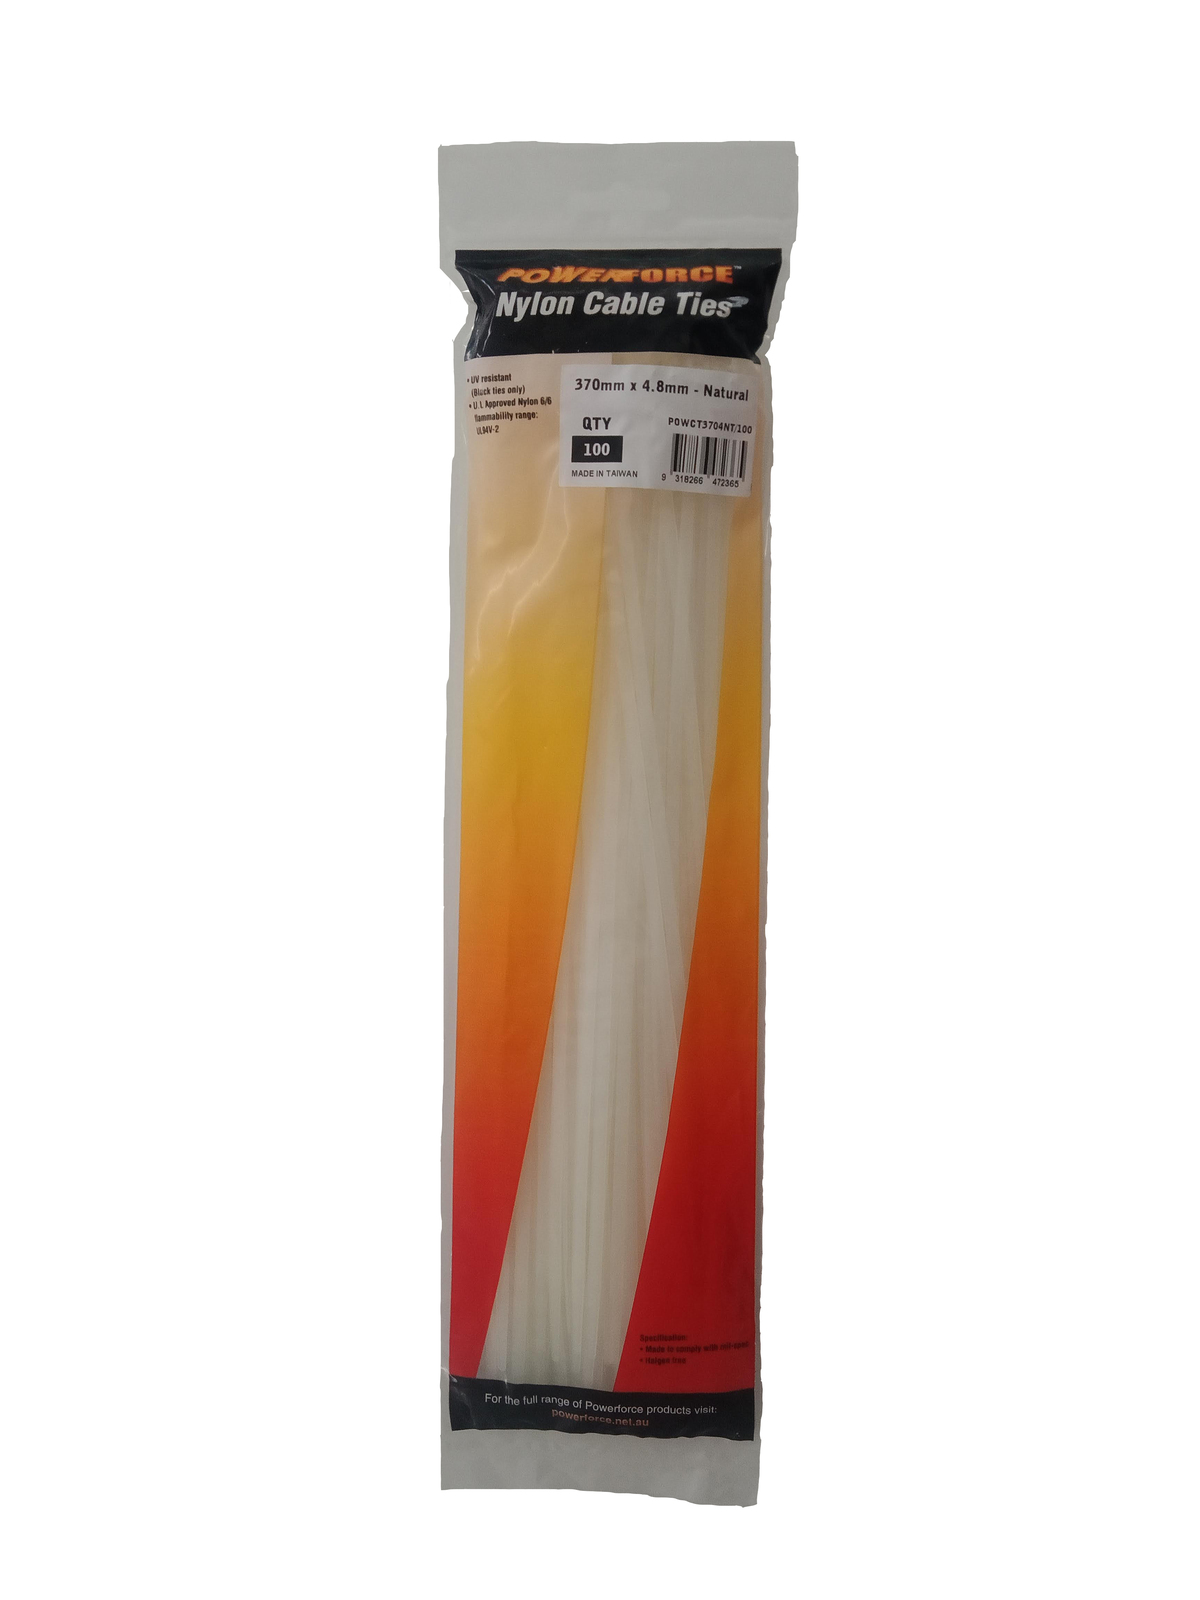 POWCT3704NT/100 CABLE TIE, NYLON - NATURAL 370mm x 4.8mm [100] PACK